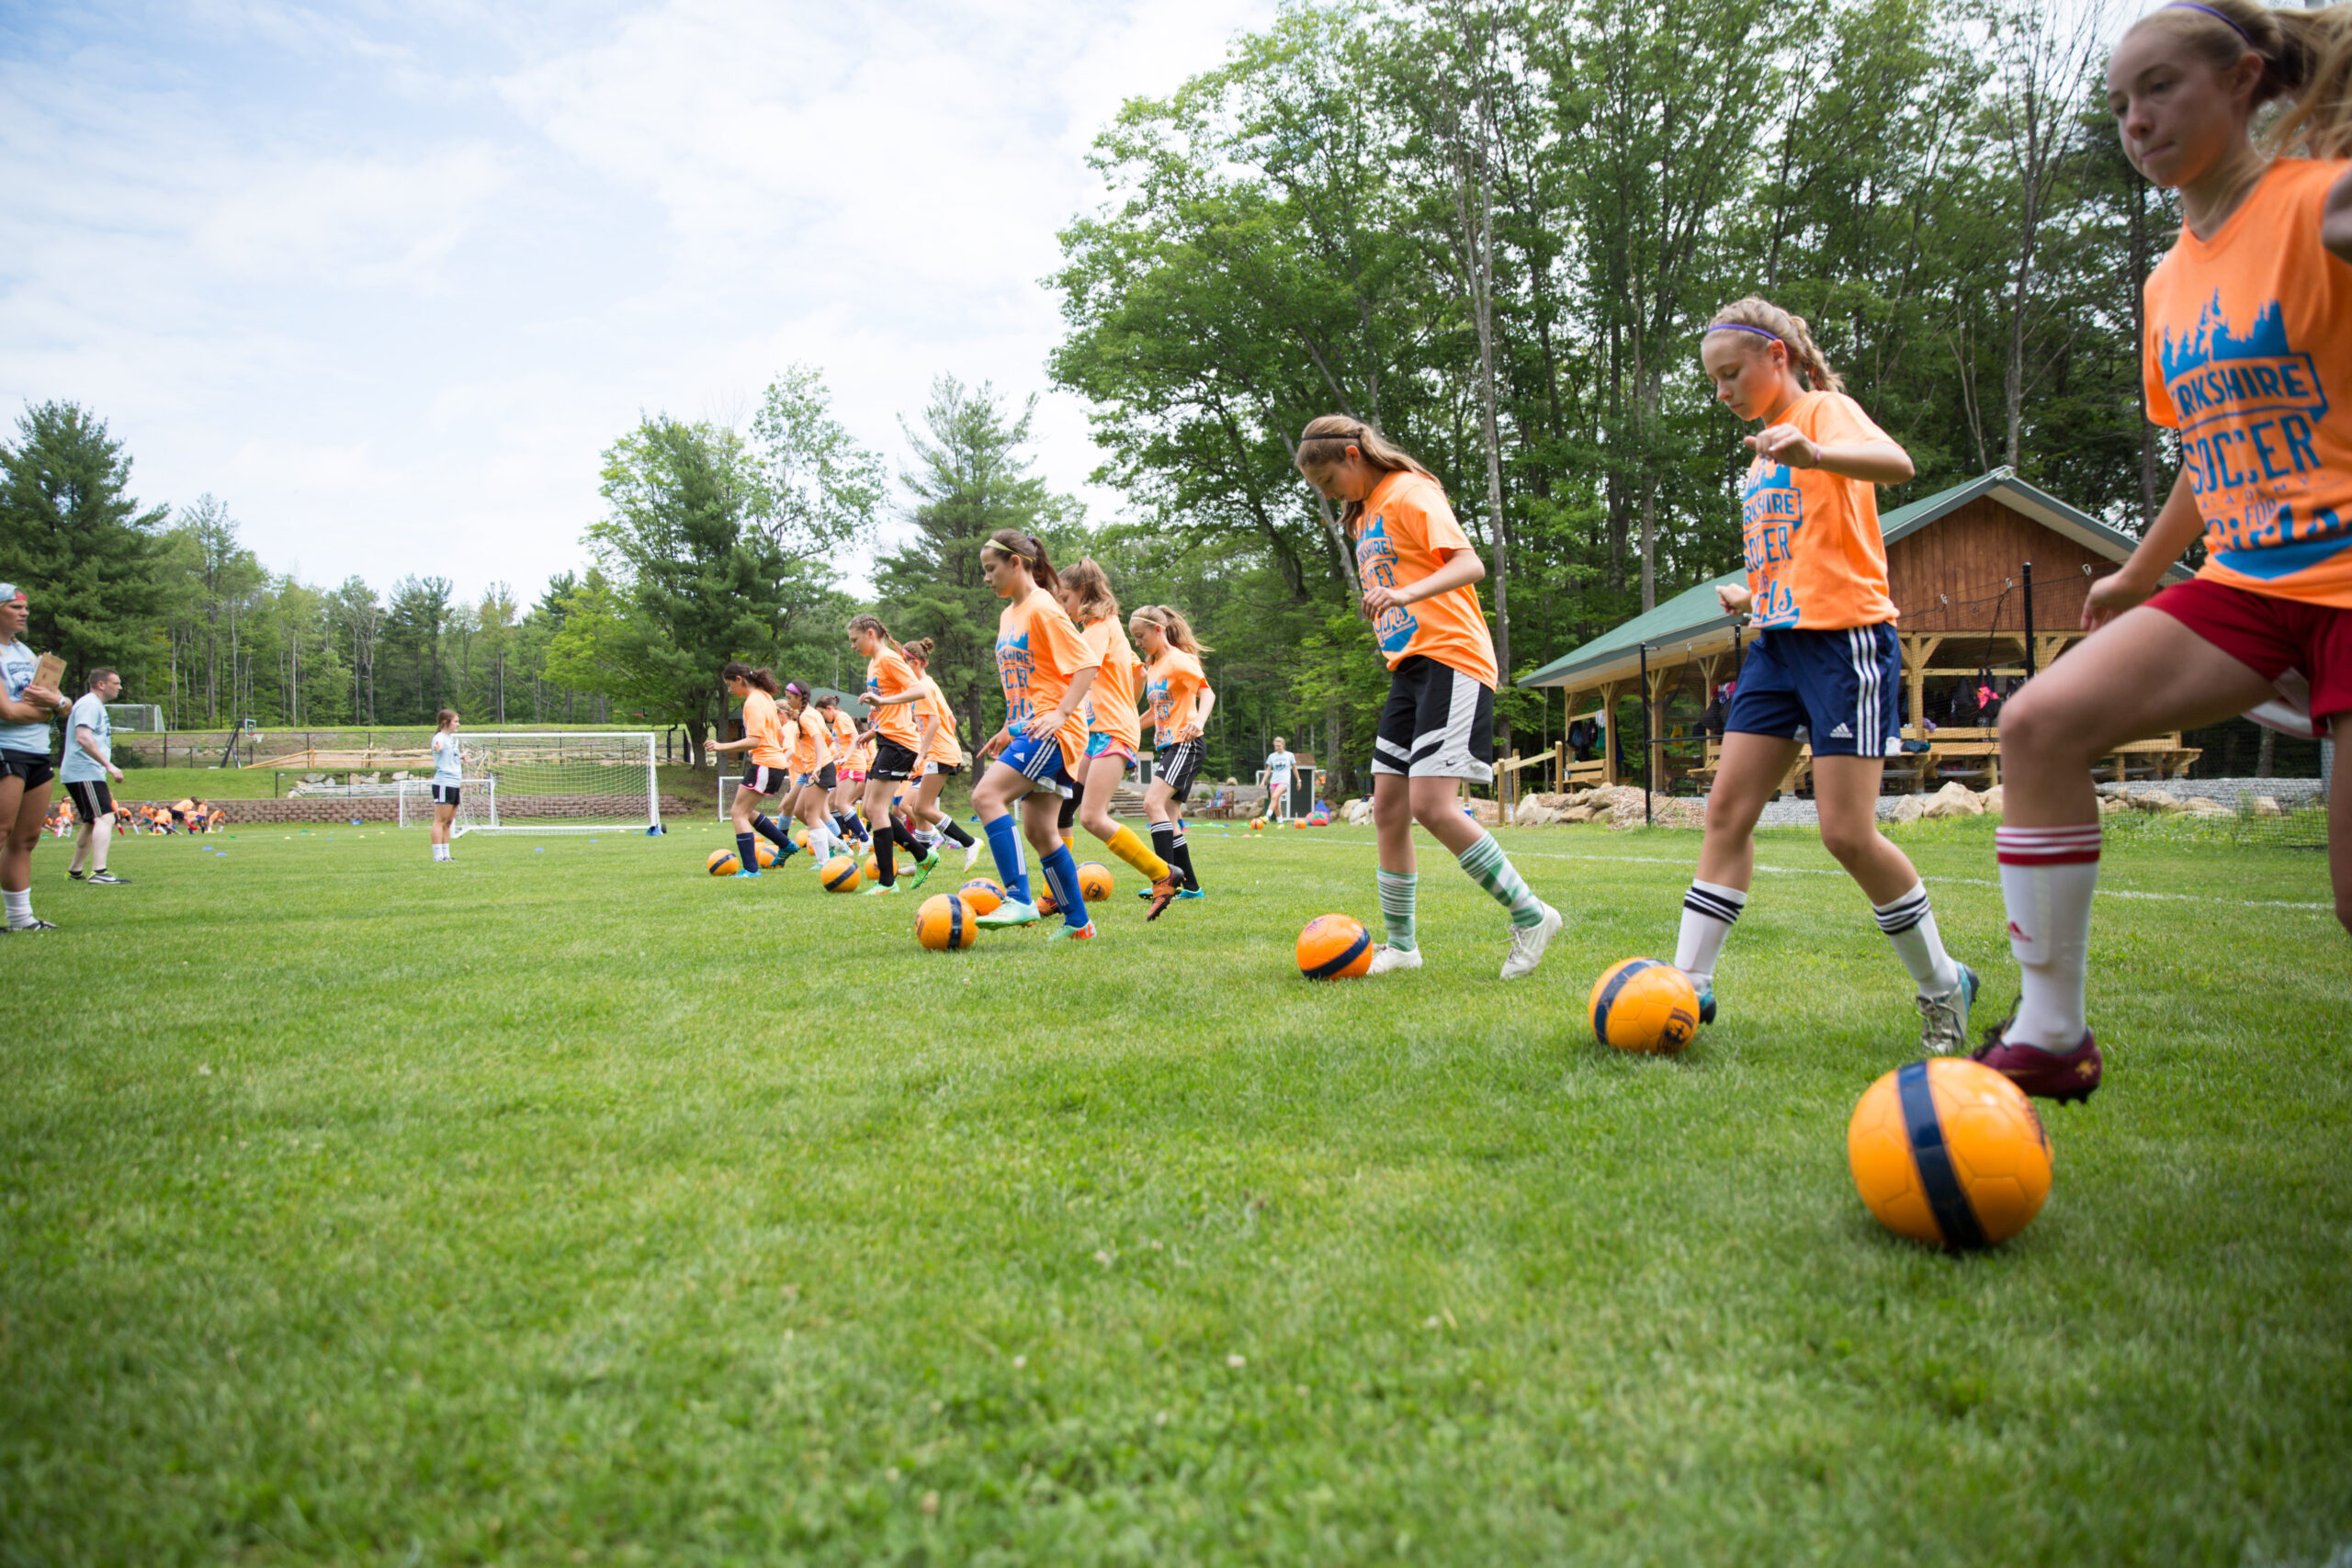 Summer camps in the Berkshires is a slam dunk!